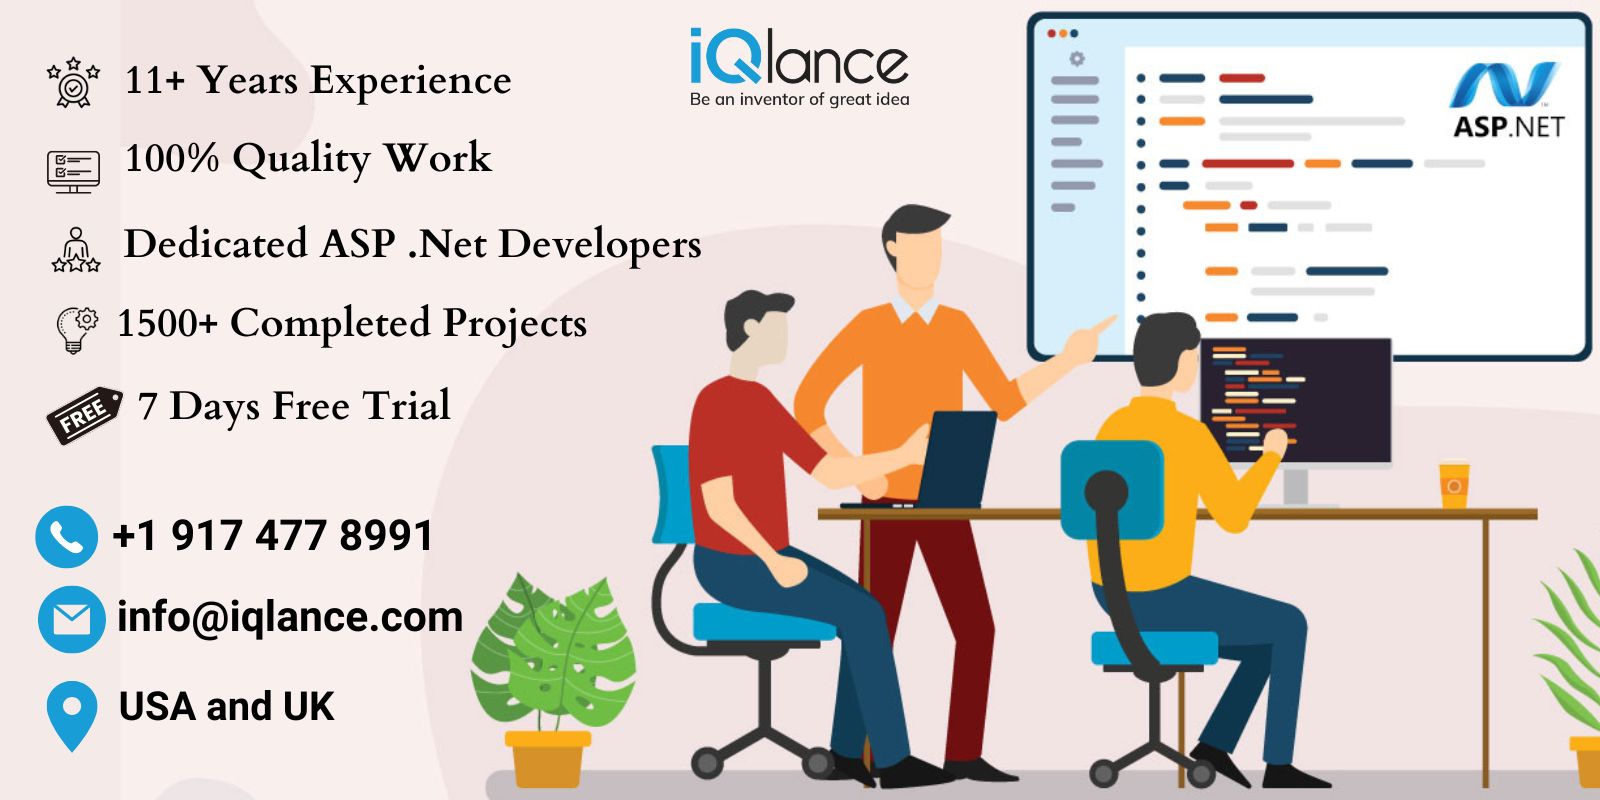 .Net Development Company in India - iQlance|Accounting Services|Professional Services